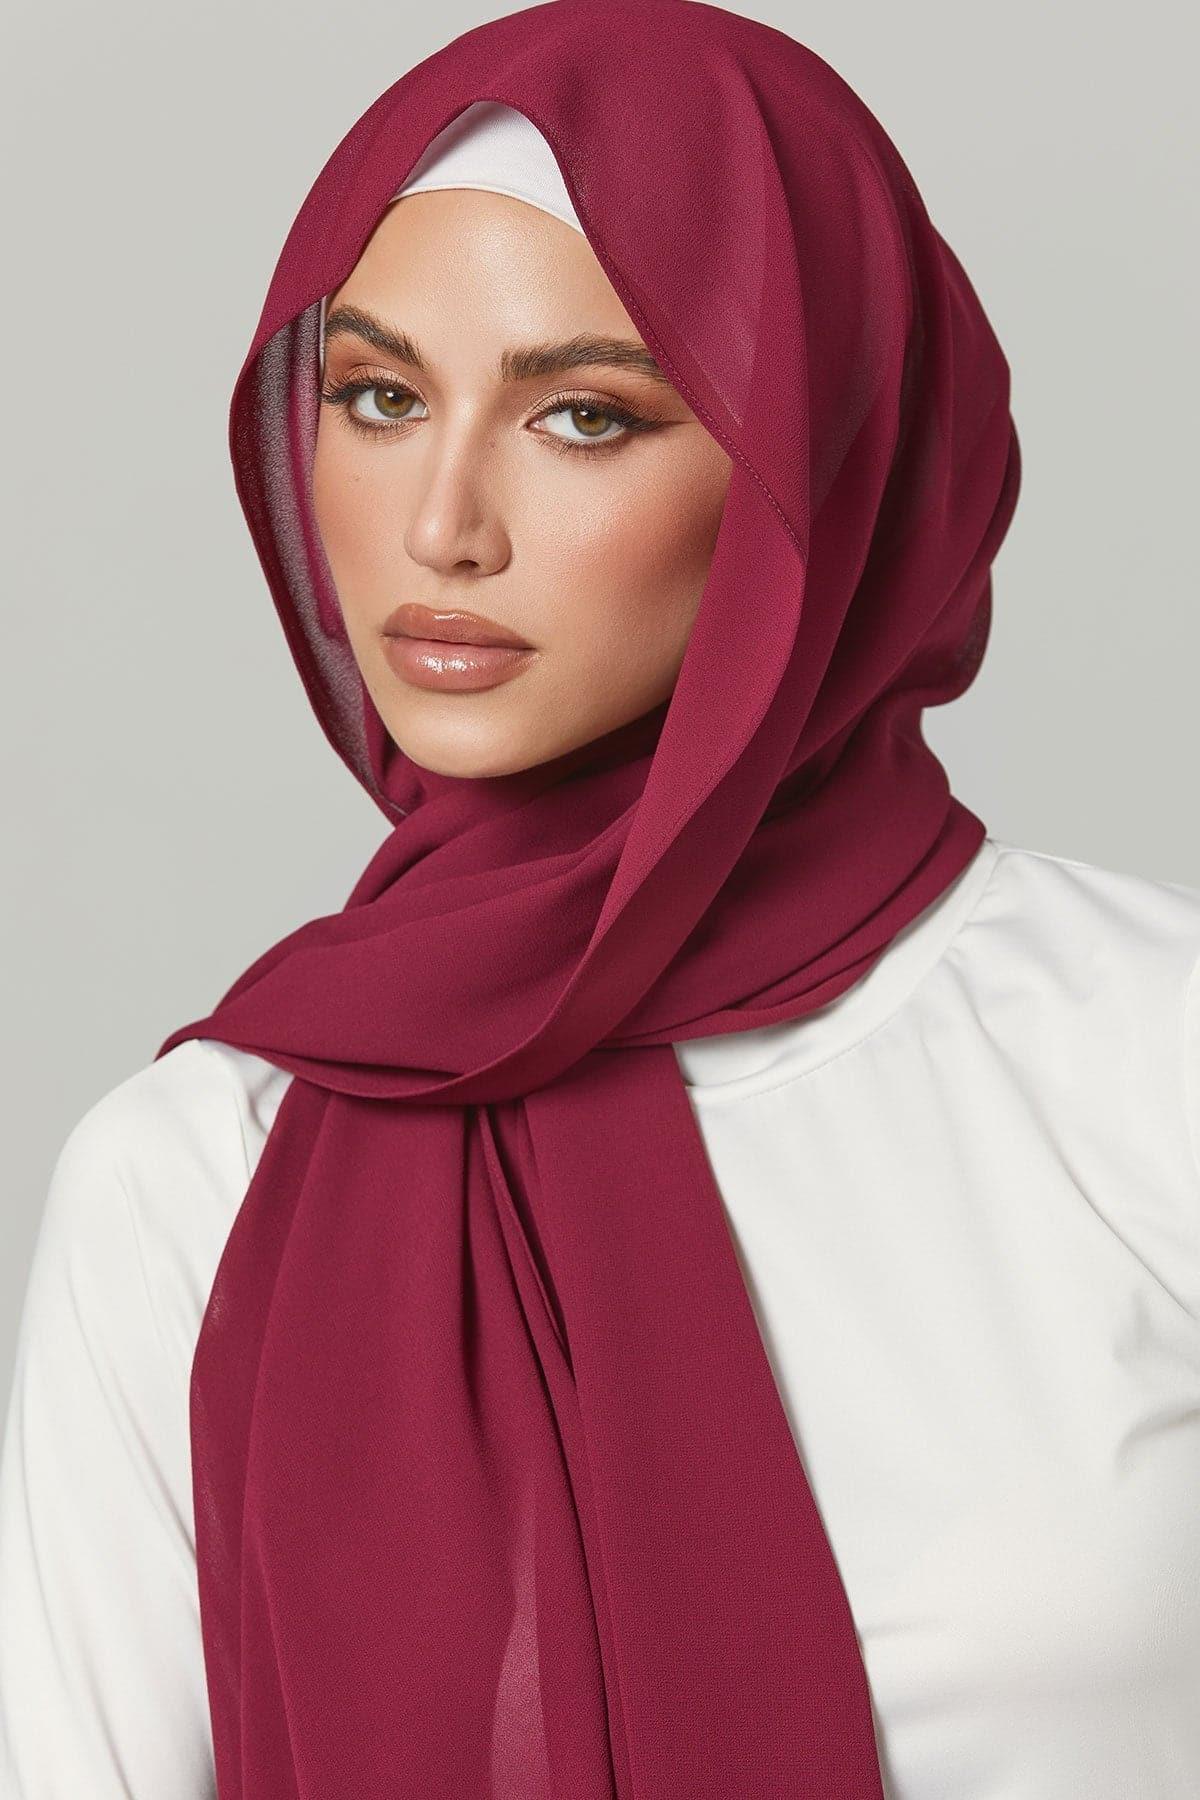 HH EXCLUSIVE // Sarah assembles the Hijab Stand. The new way to organi, any hijab collection